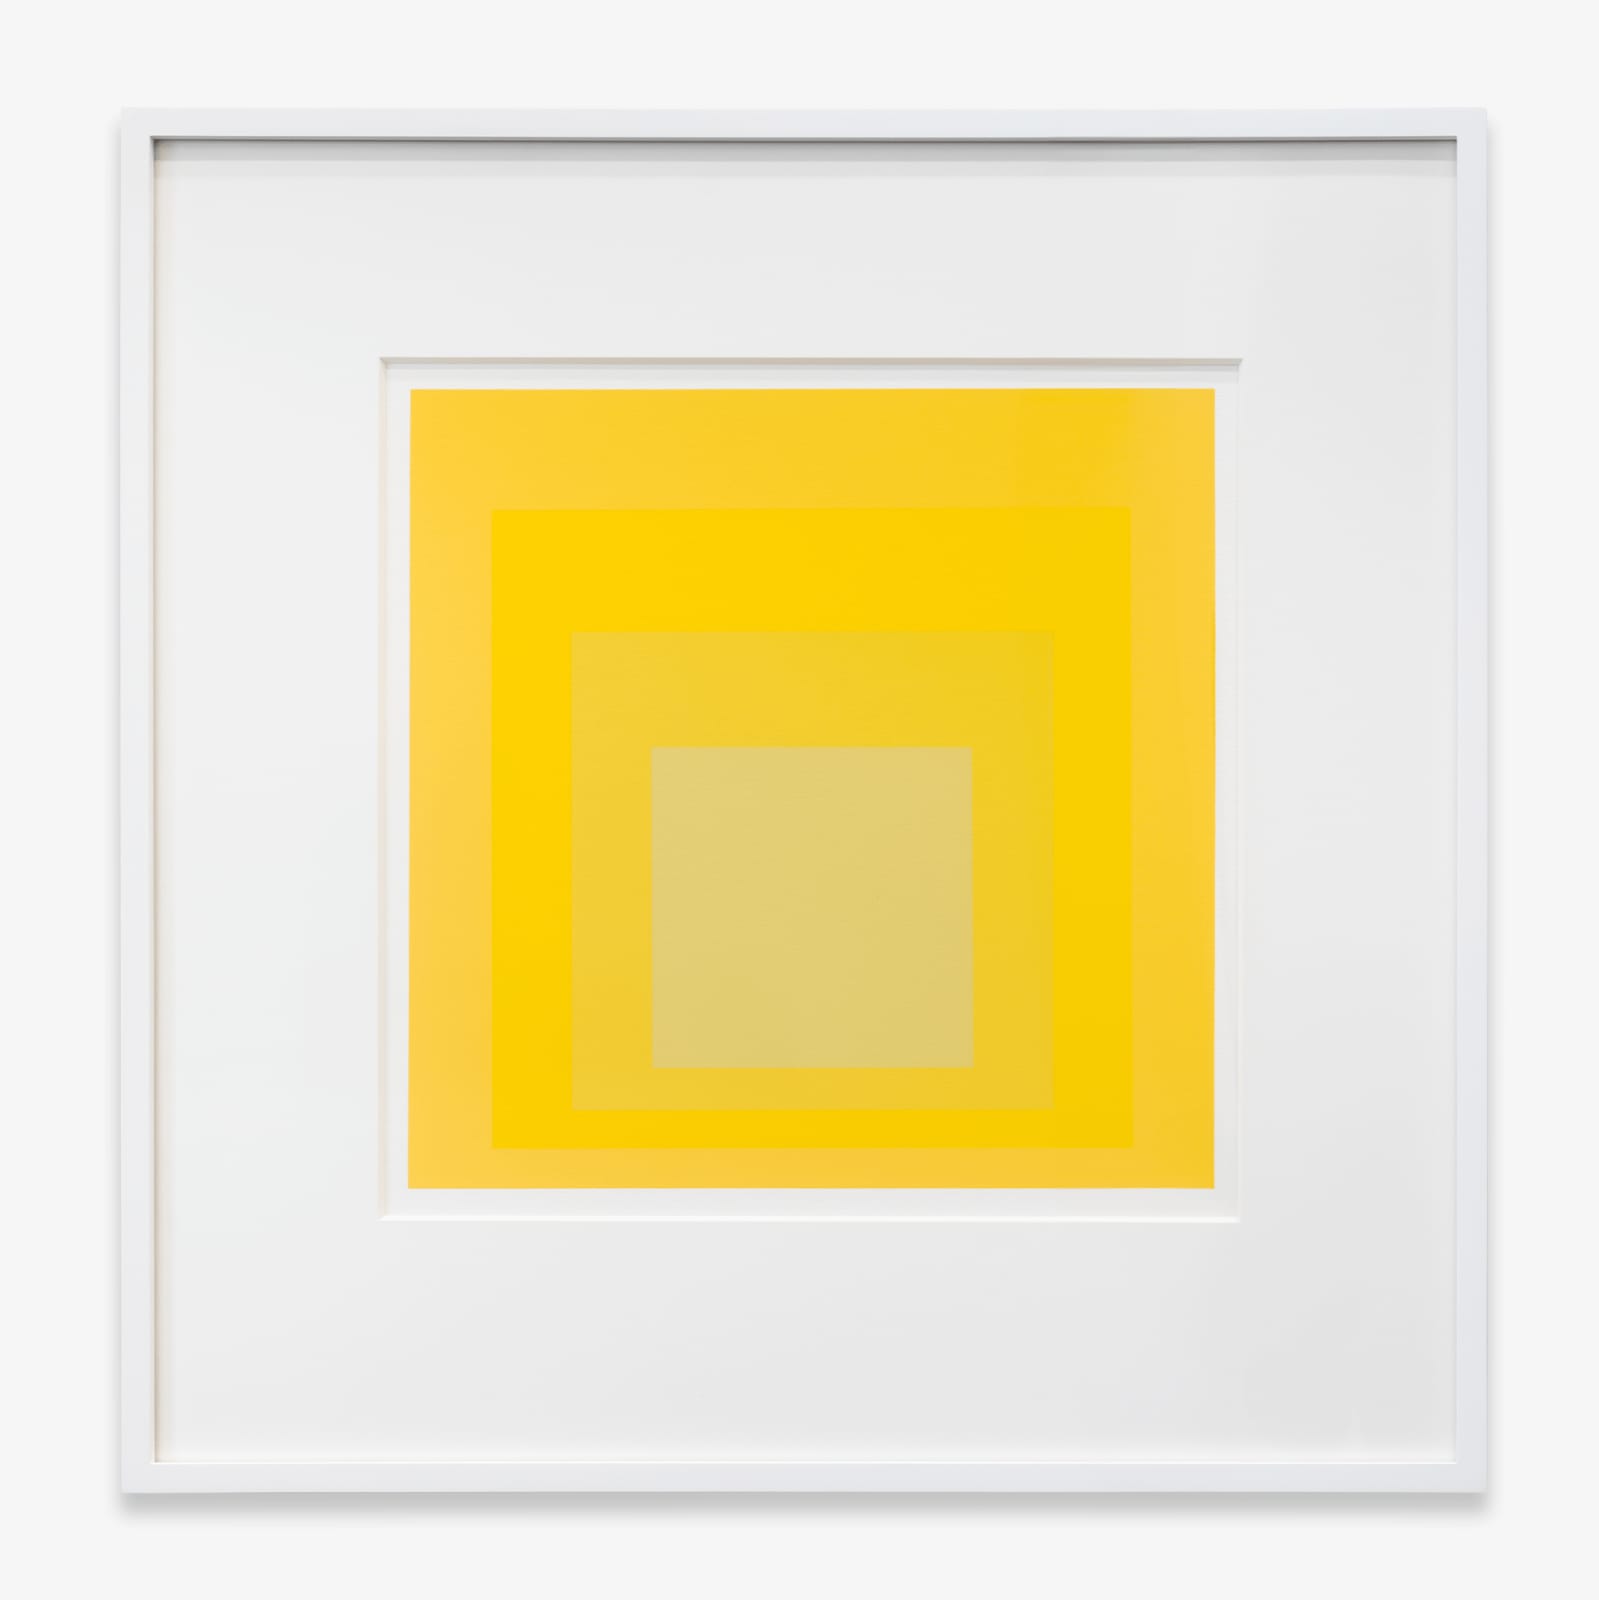 Josef Albers, Homage to the Square Series, 1971